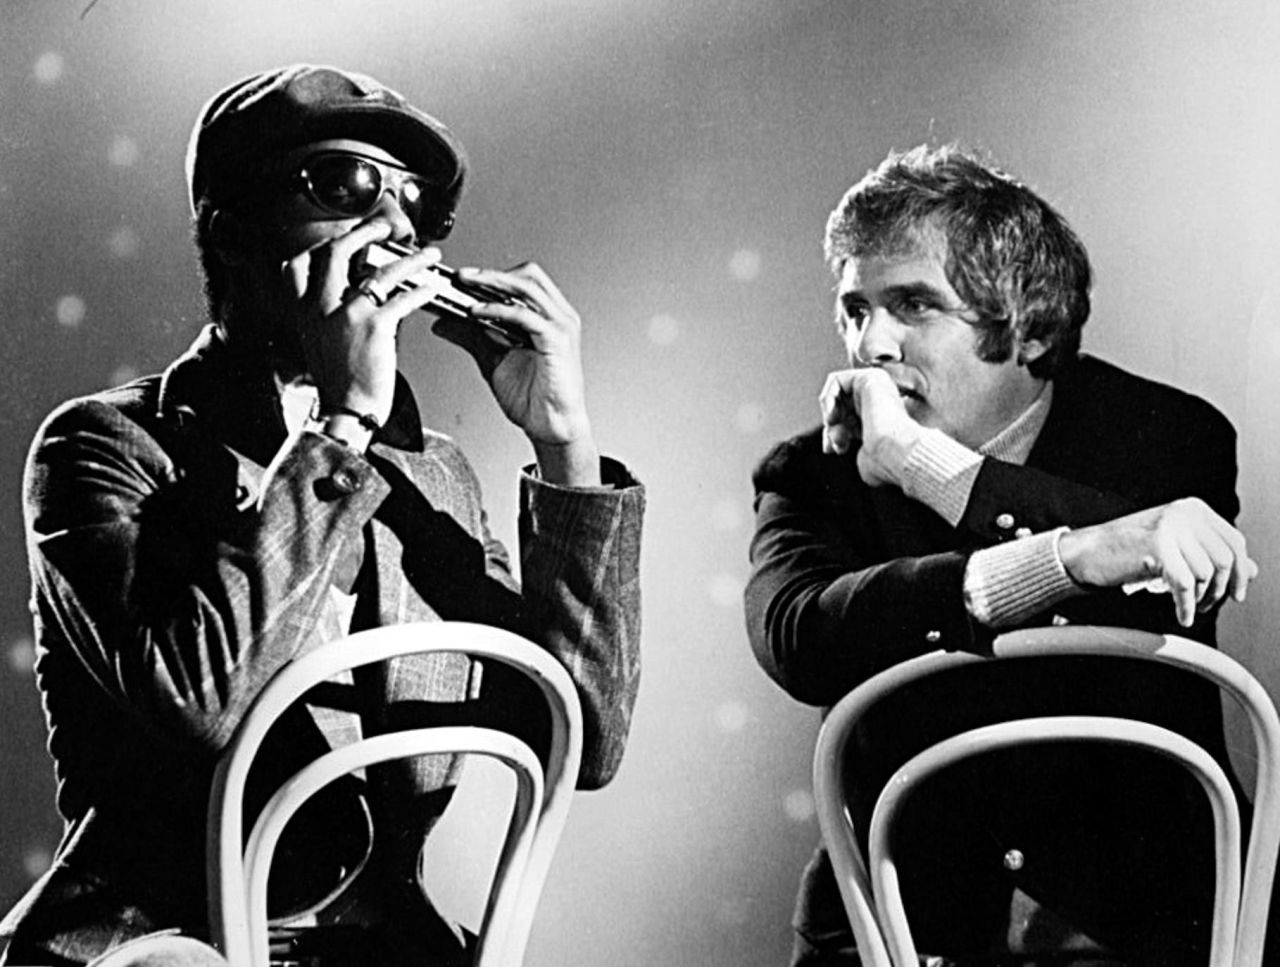 Bacharach jams with Stevie Wonder in 1973.